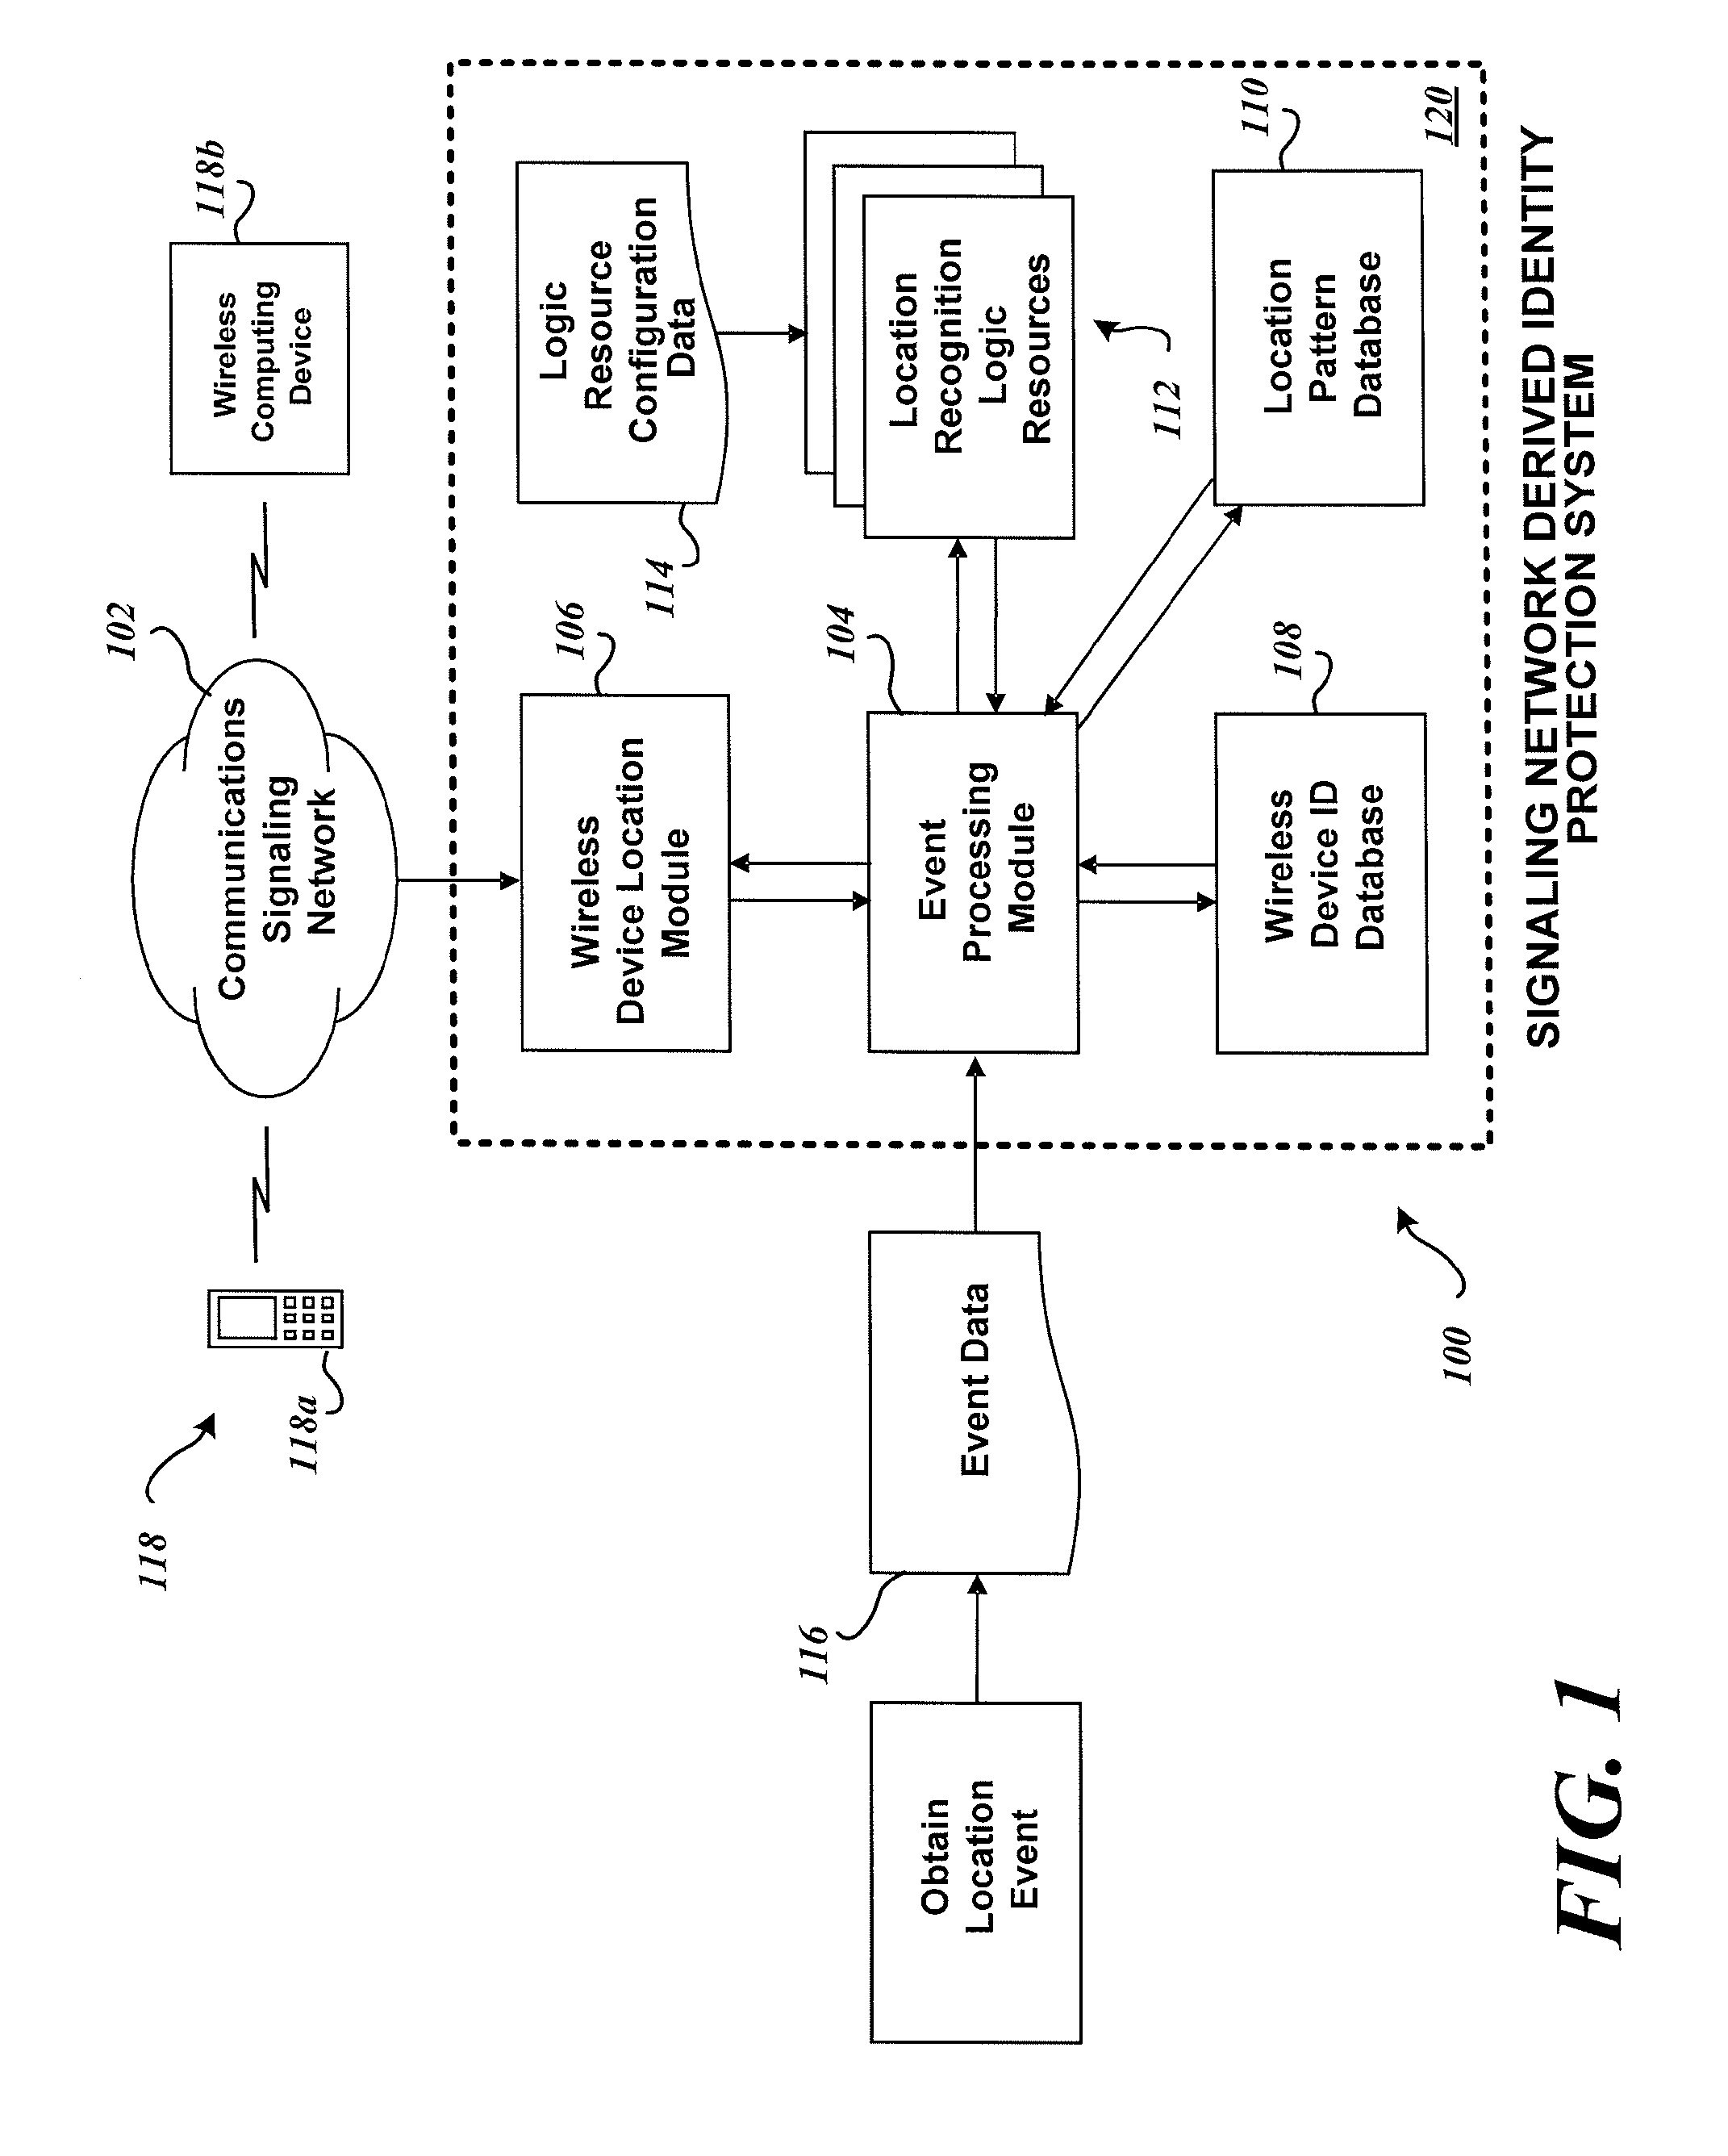 System and method for identity protection using mobile device signaling network derived location pattern recognition